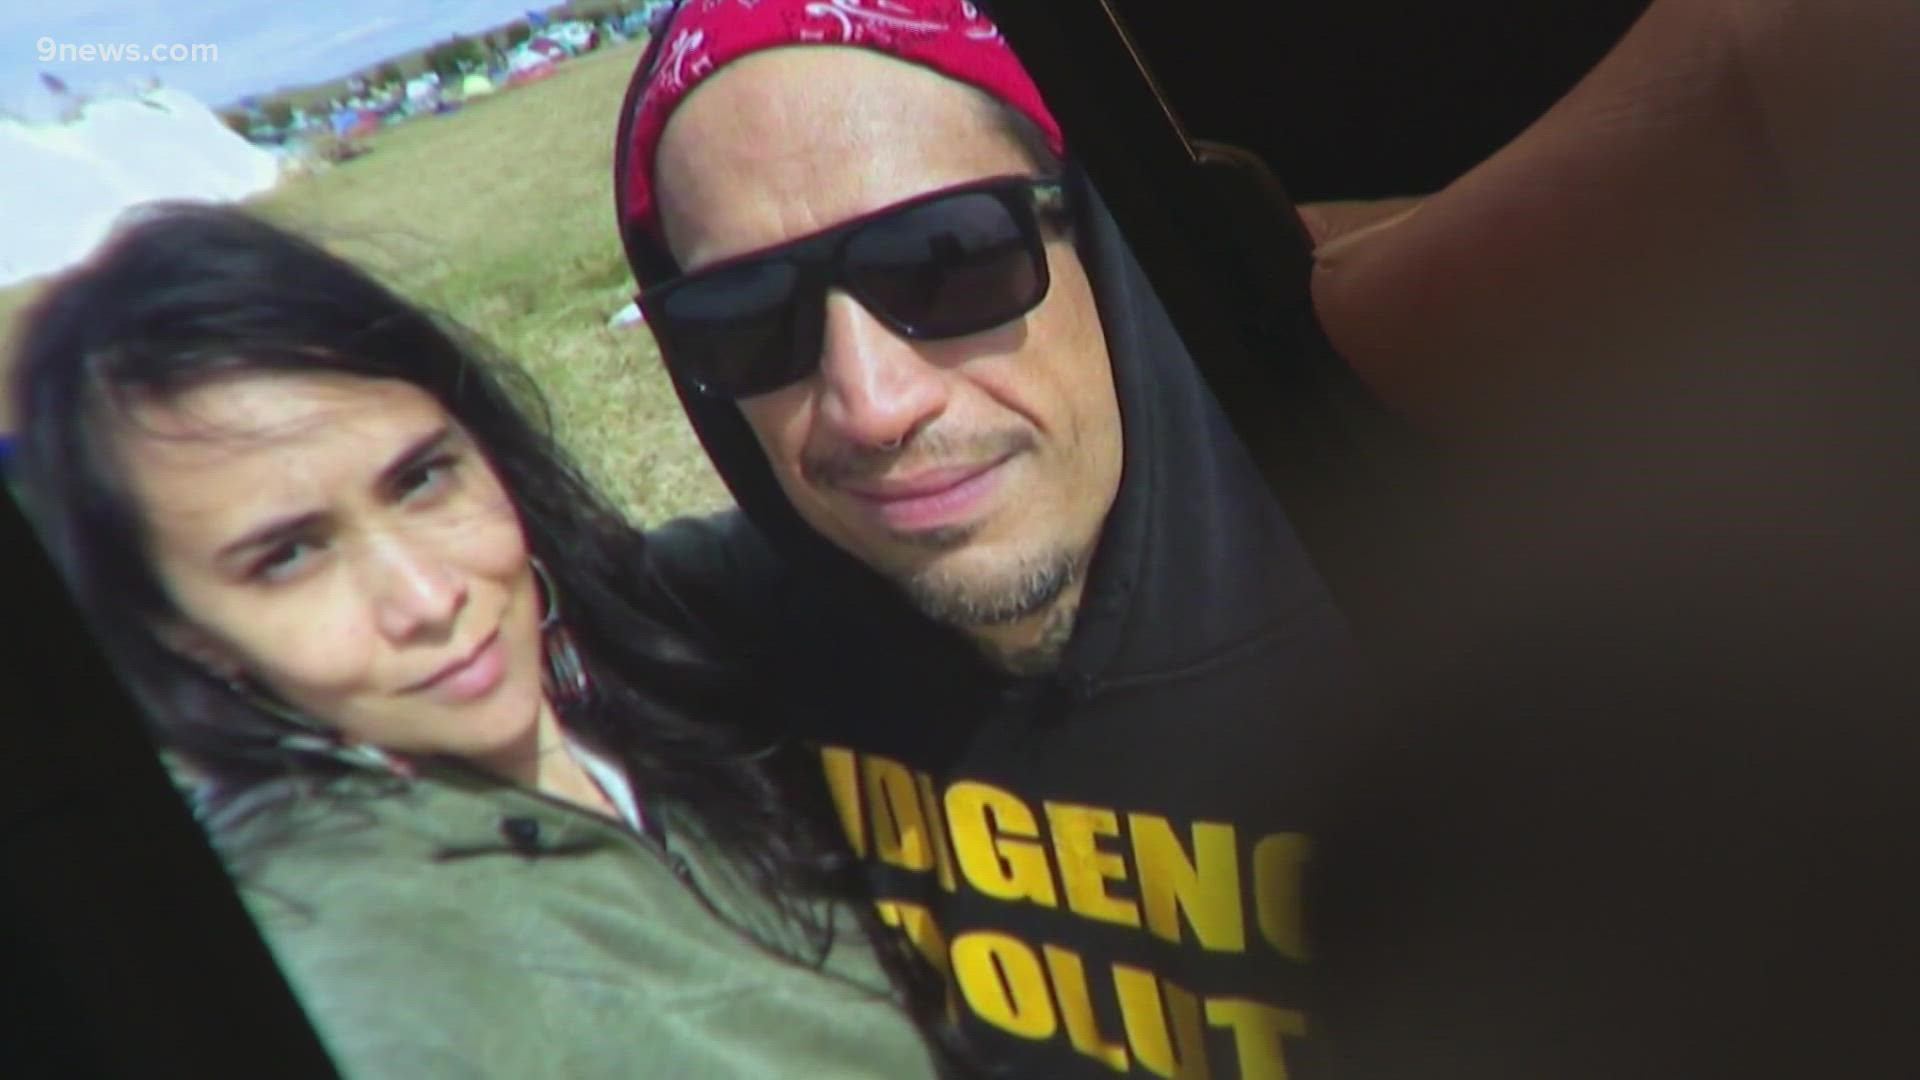 Jimmy Maldonado remains hospitalized with a bullet in his chest. His wife, Alyssa Gunn Maldonado, died after they were both shot during the killing spree.